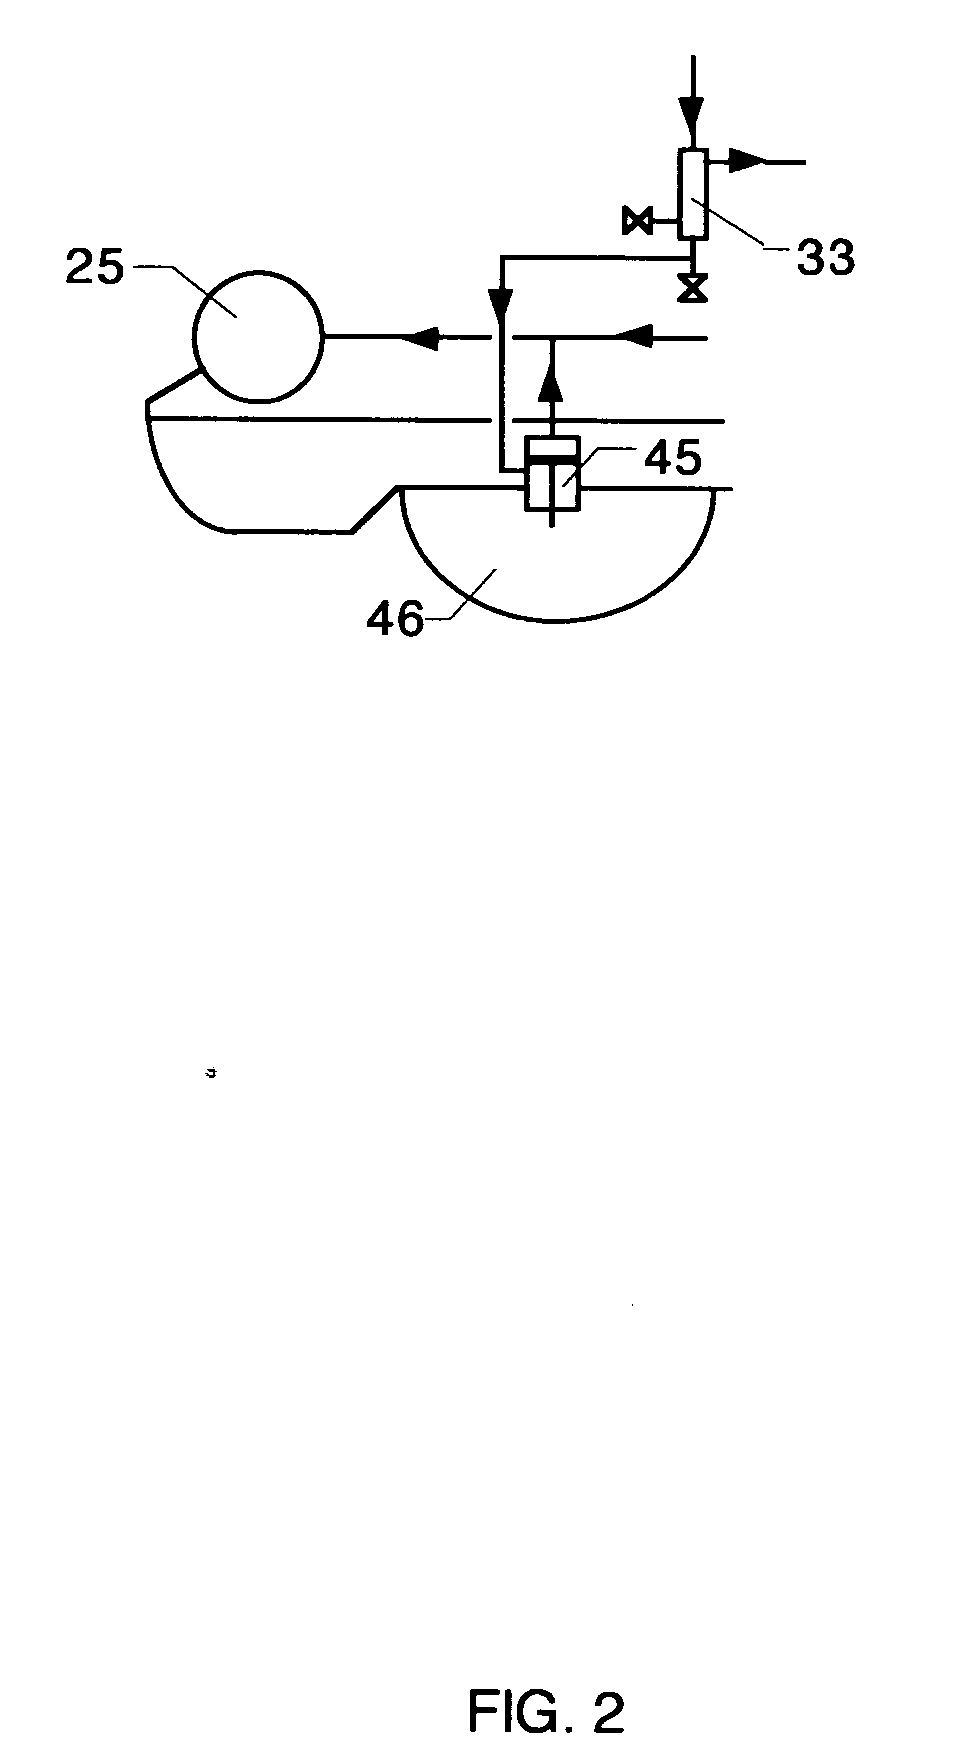 Motor vehicle energy recovery, storage, transfer and consumption system